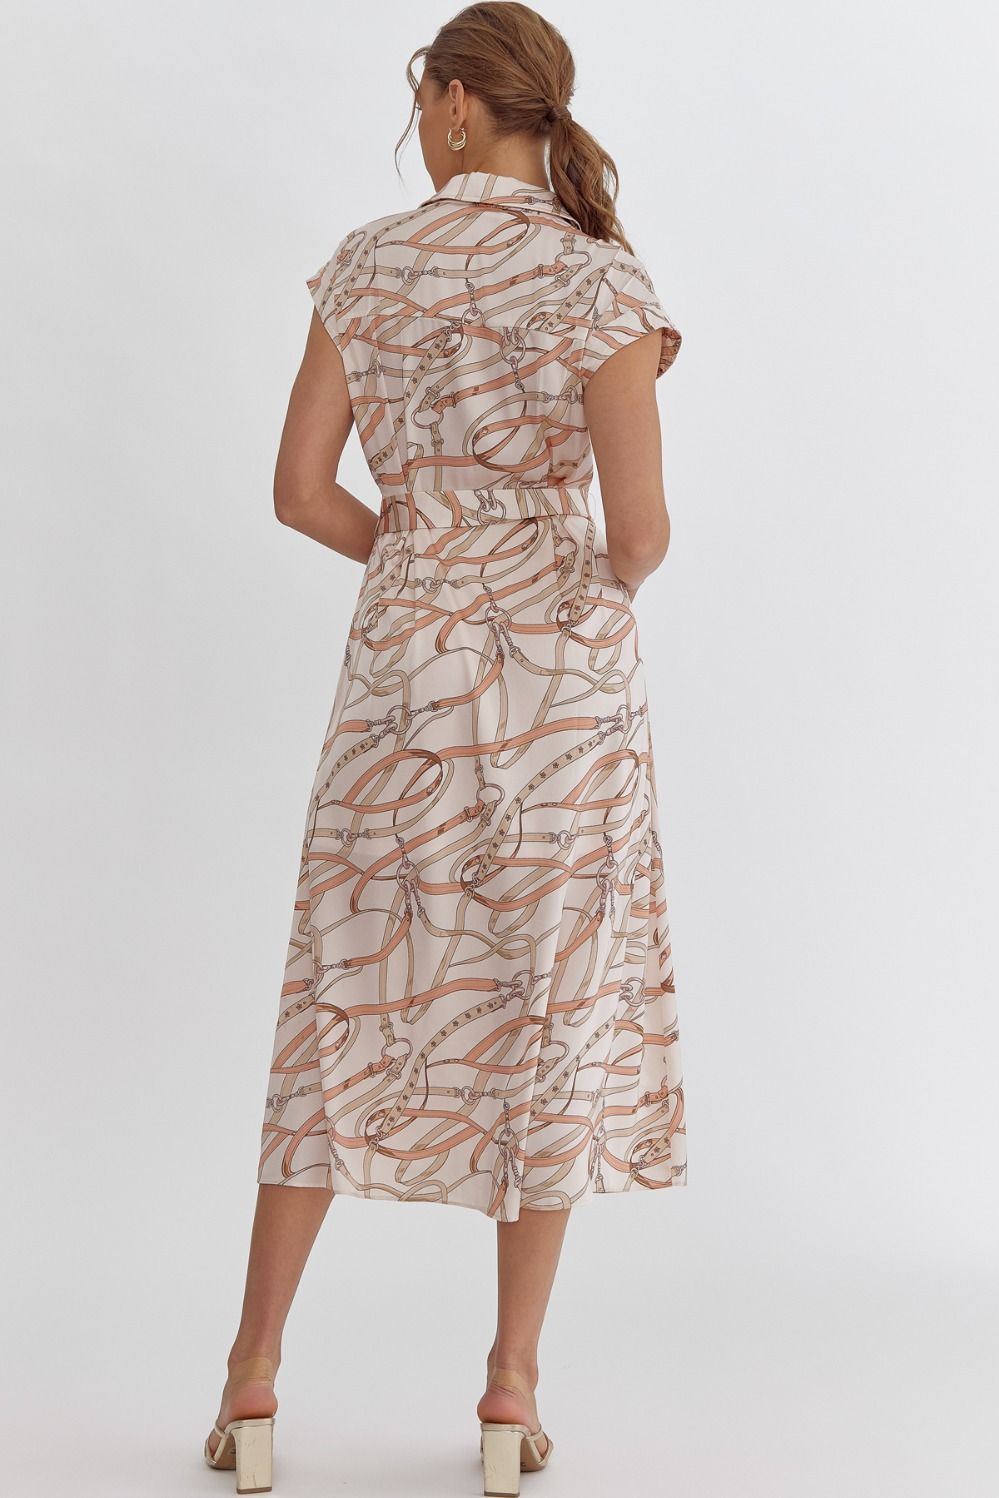 The Buckle Up Natural Harness Print Midi Dress